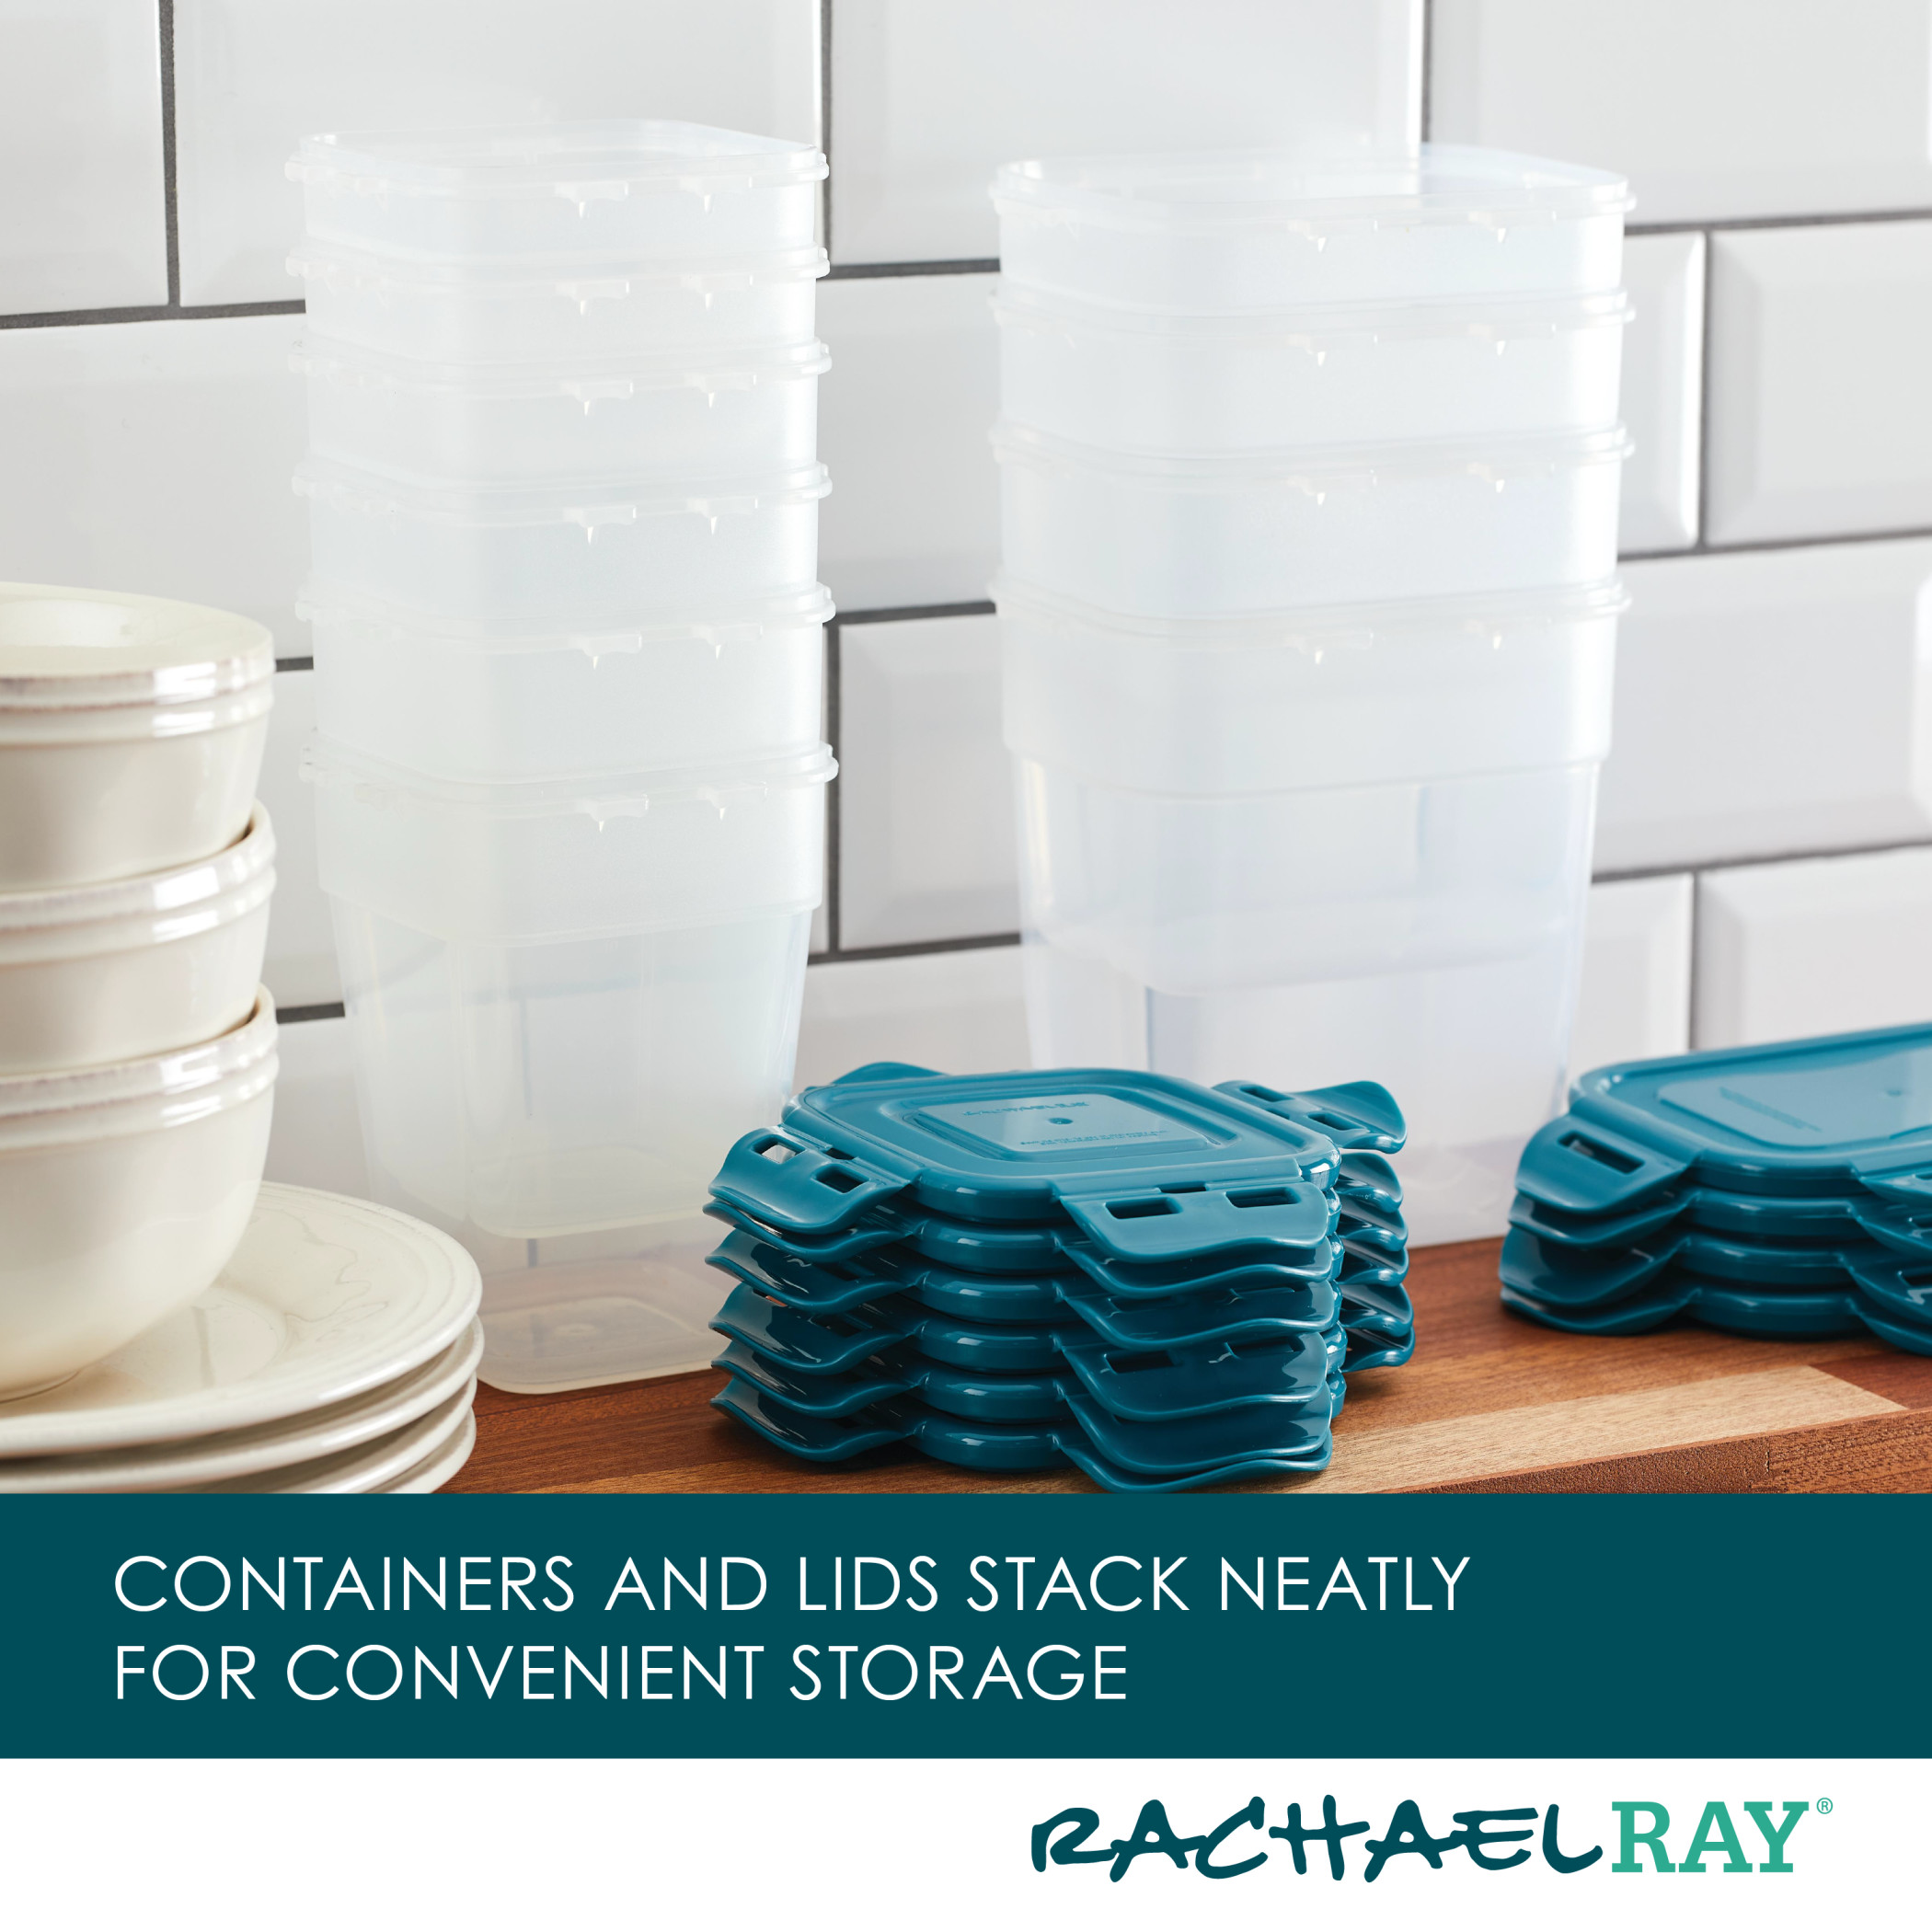 Rachael Ray Leak-Proof Stacking Food Storage Container Set, 20-Piece, Teal Lids - image 4 of 17